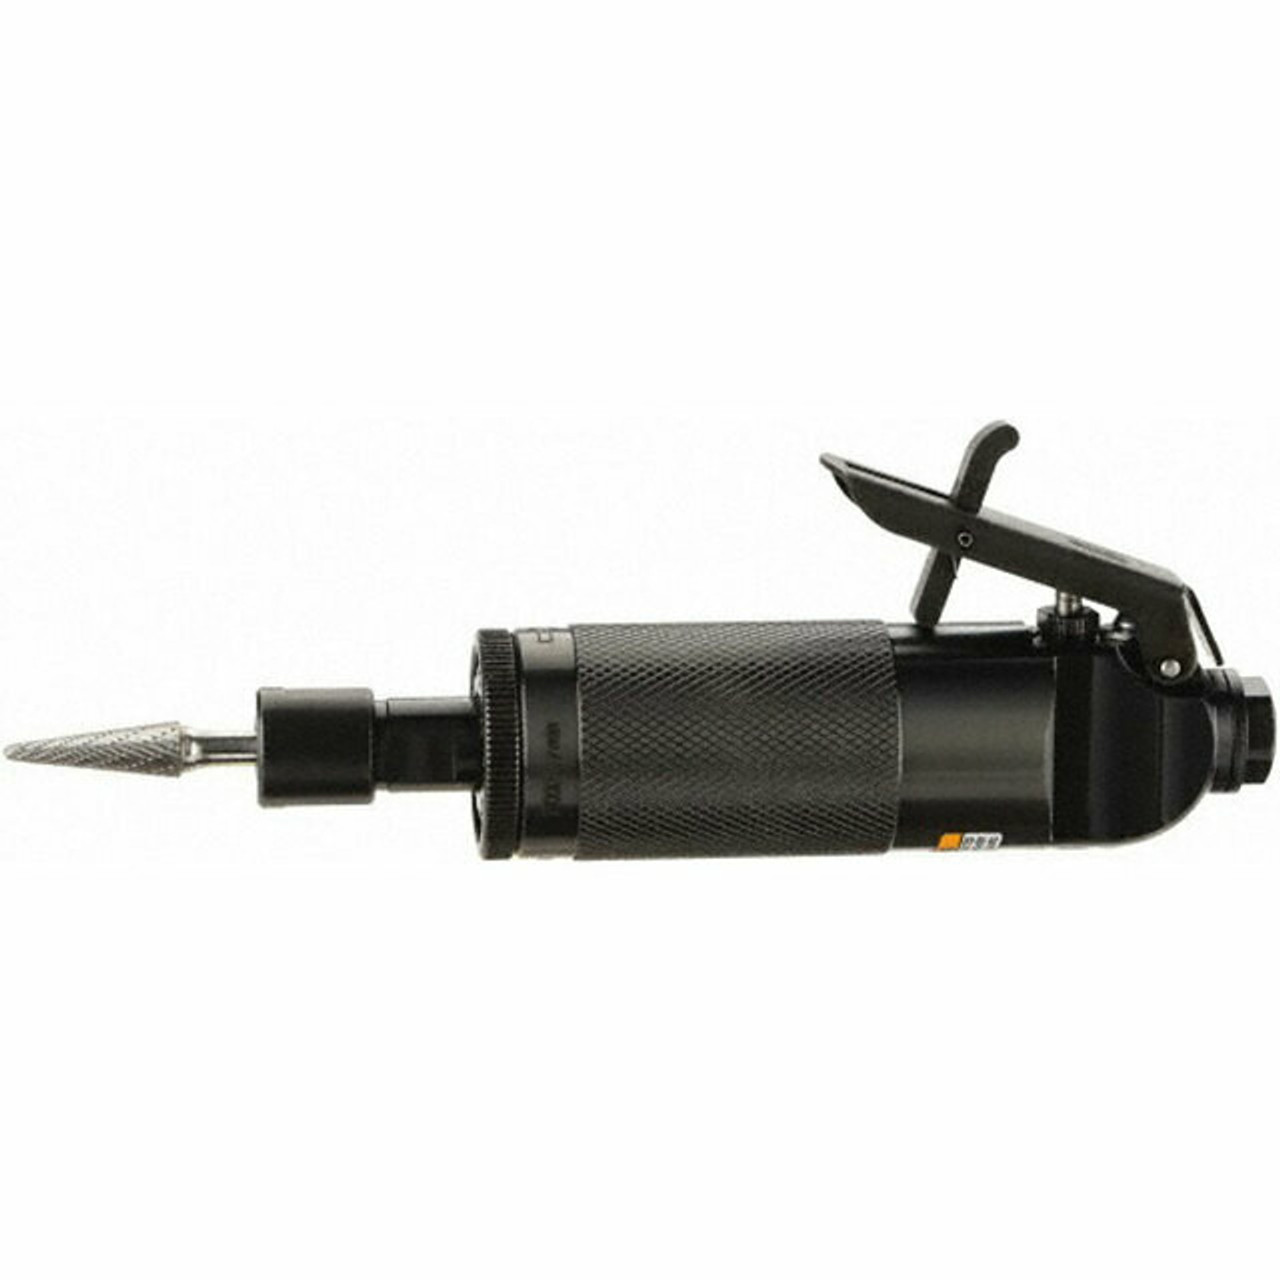 Sioux Tools SDGA1S25 Straight Metal Body Die Grinder or 1 HP or 25000 RPM or Front Exhaust